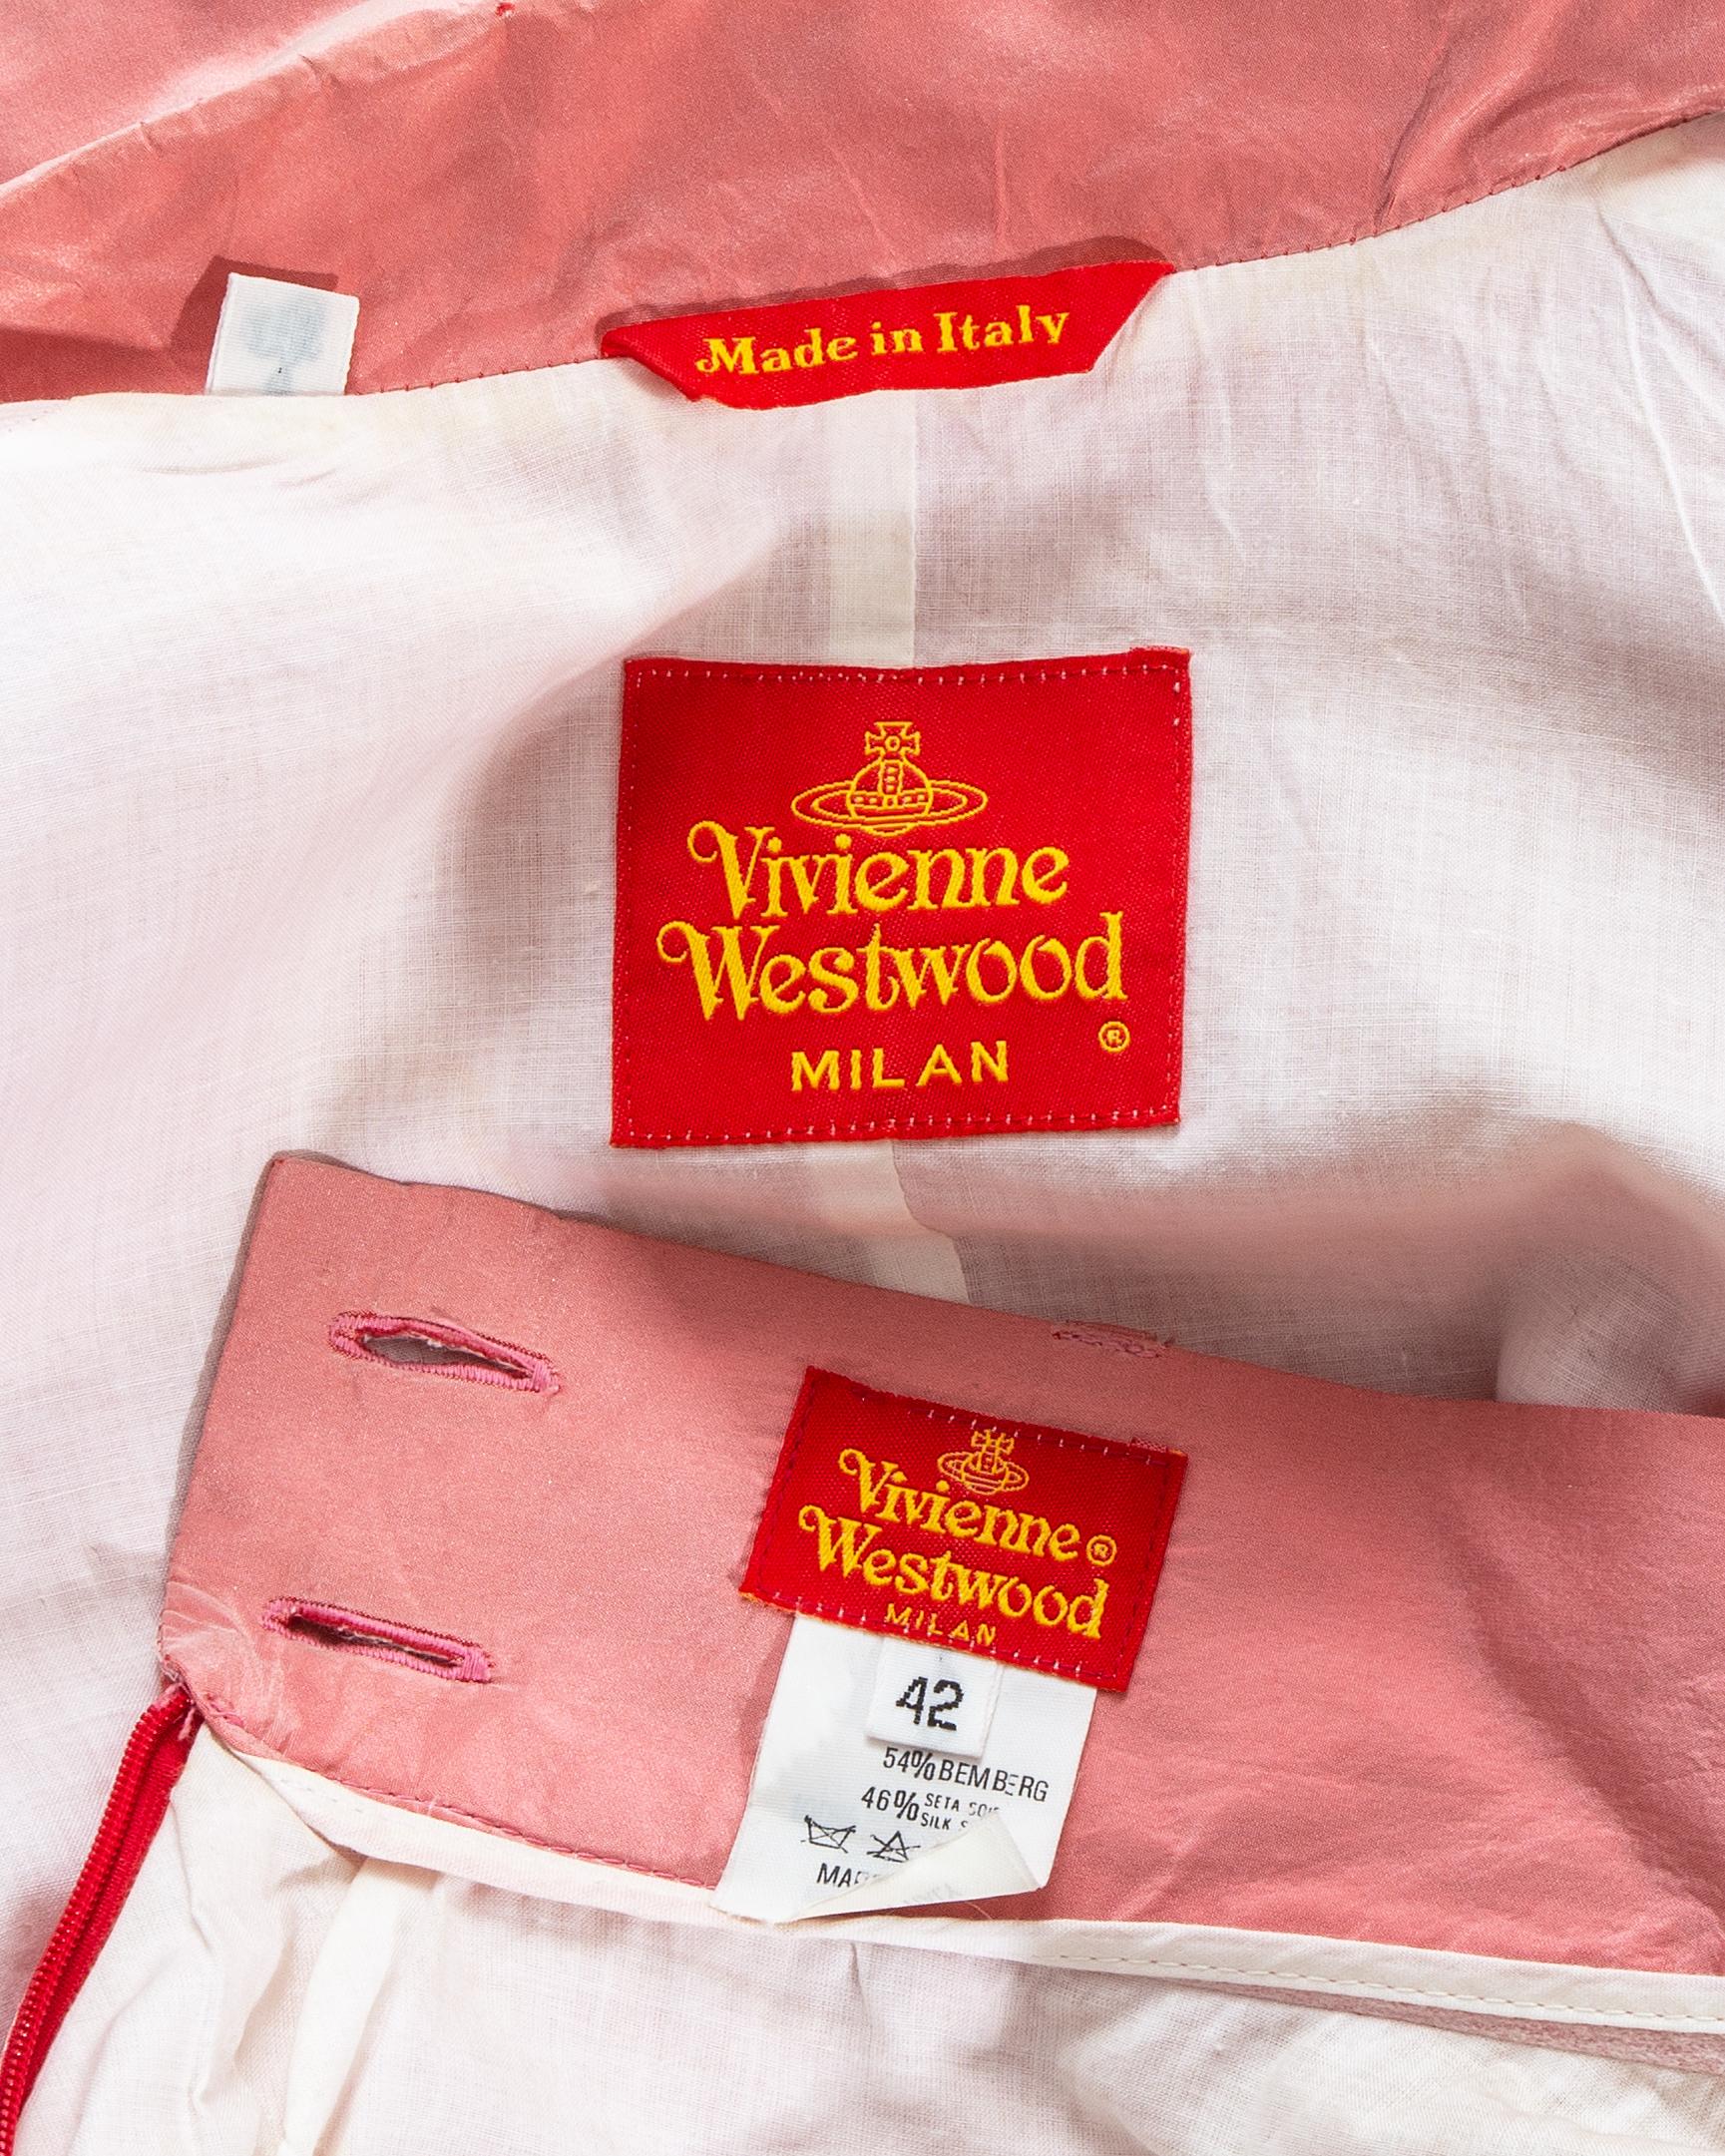 Vivienne Westwood salmon pink silk peplum blazer jacket and skirt suit, ss 1994 In Good Condition For Sale In London, GB